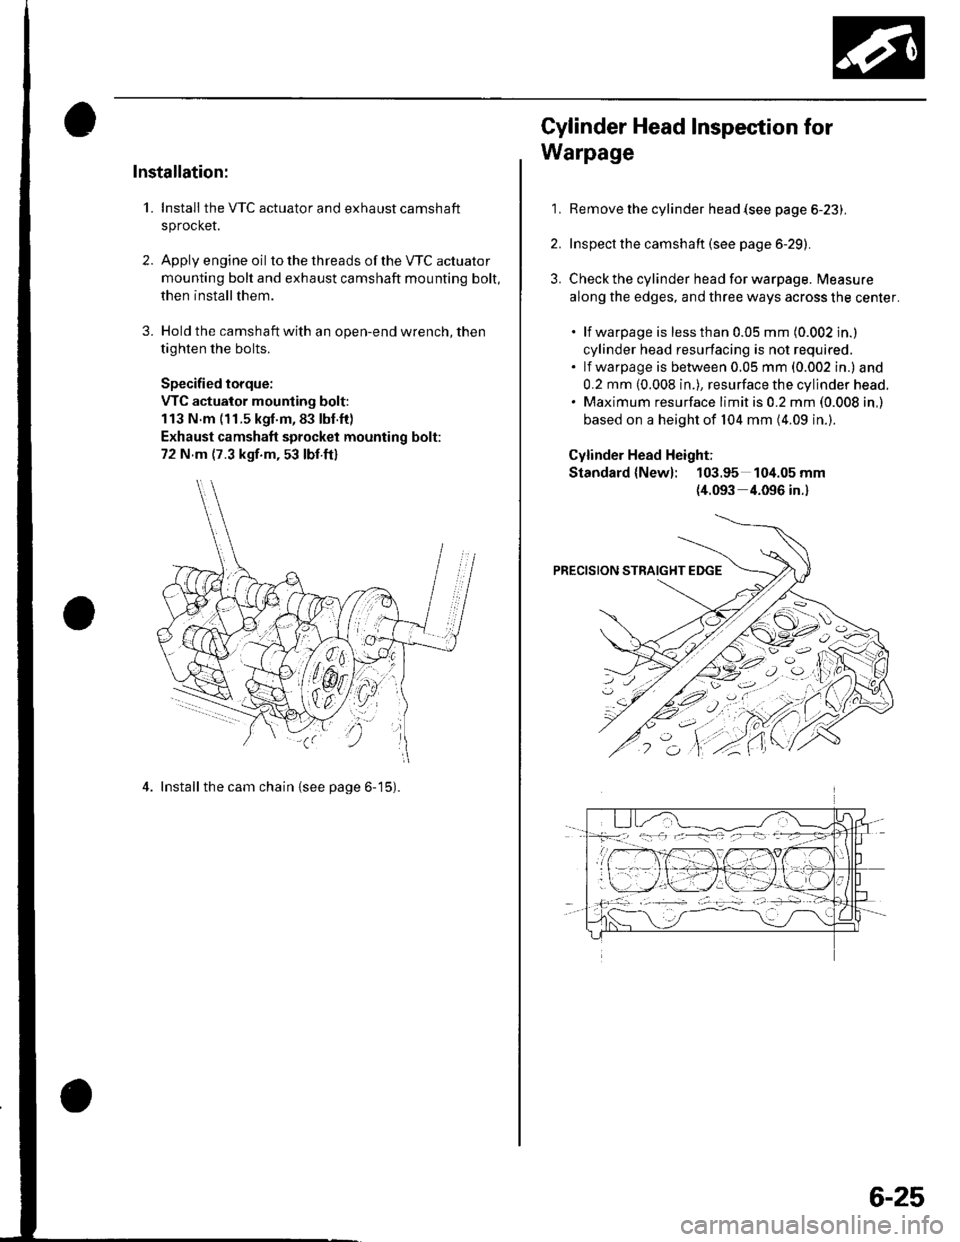 HONDA CIVIC 2003 7.G Owners Manual Installation:
1. Install the VTC actuator and exhaust camshaft
sprocket.
2. Apply engine oil to the th reads of the VTC actuato r
mounting bolt and exhaust camshaft mounting bolt,
then install them.
3